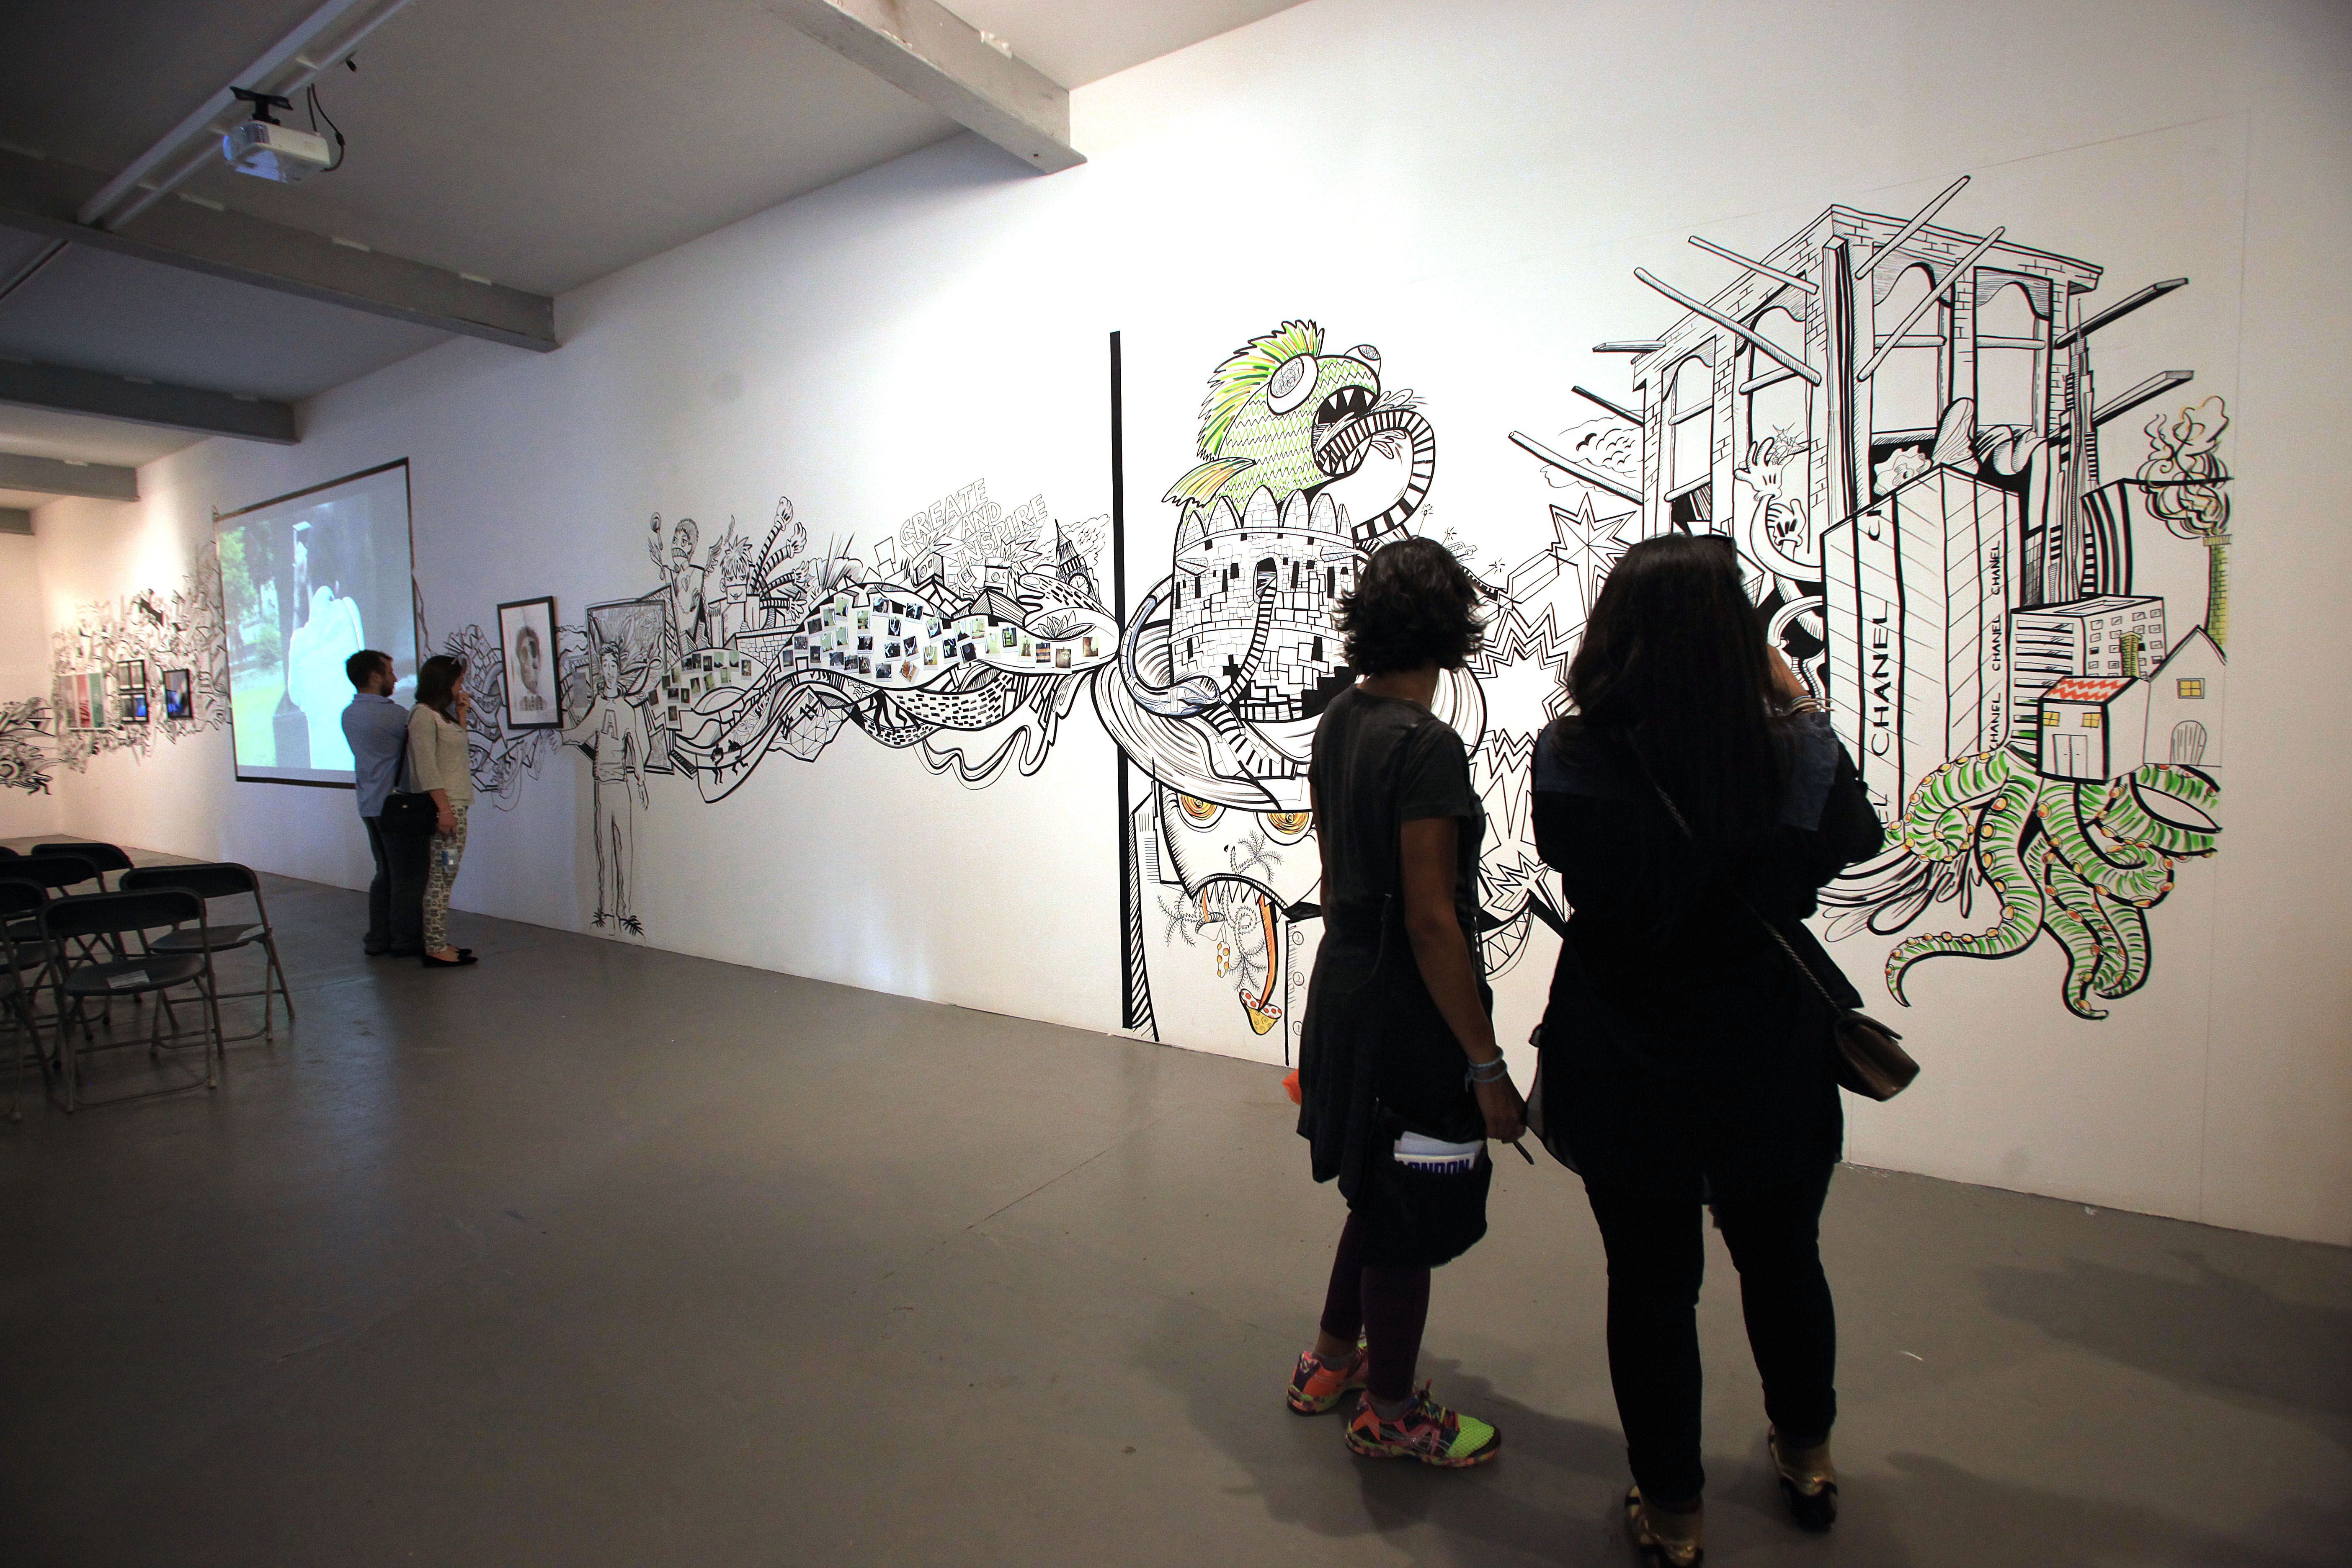 Visitors admire a mural across a gallery wall in London during Create & Inspire, part of the Qatar-Uk 2013 Year of Culture.